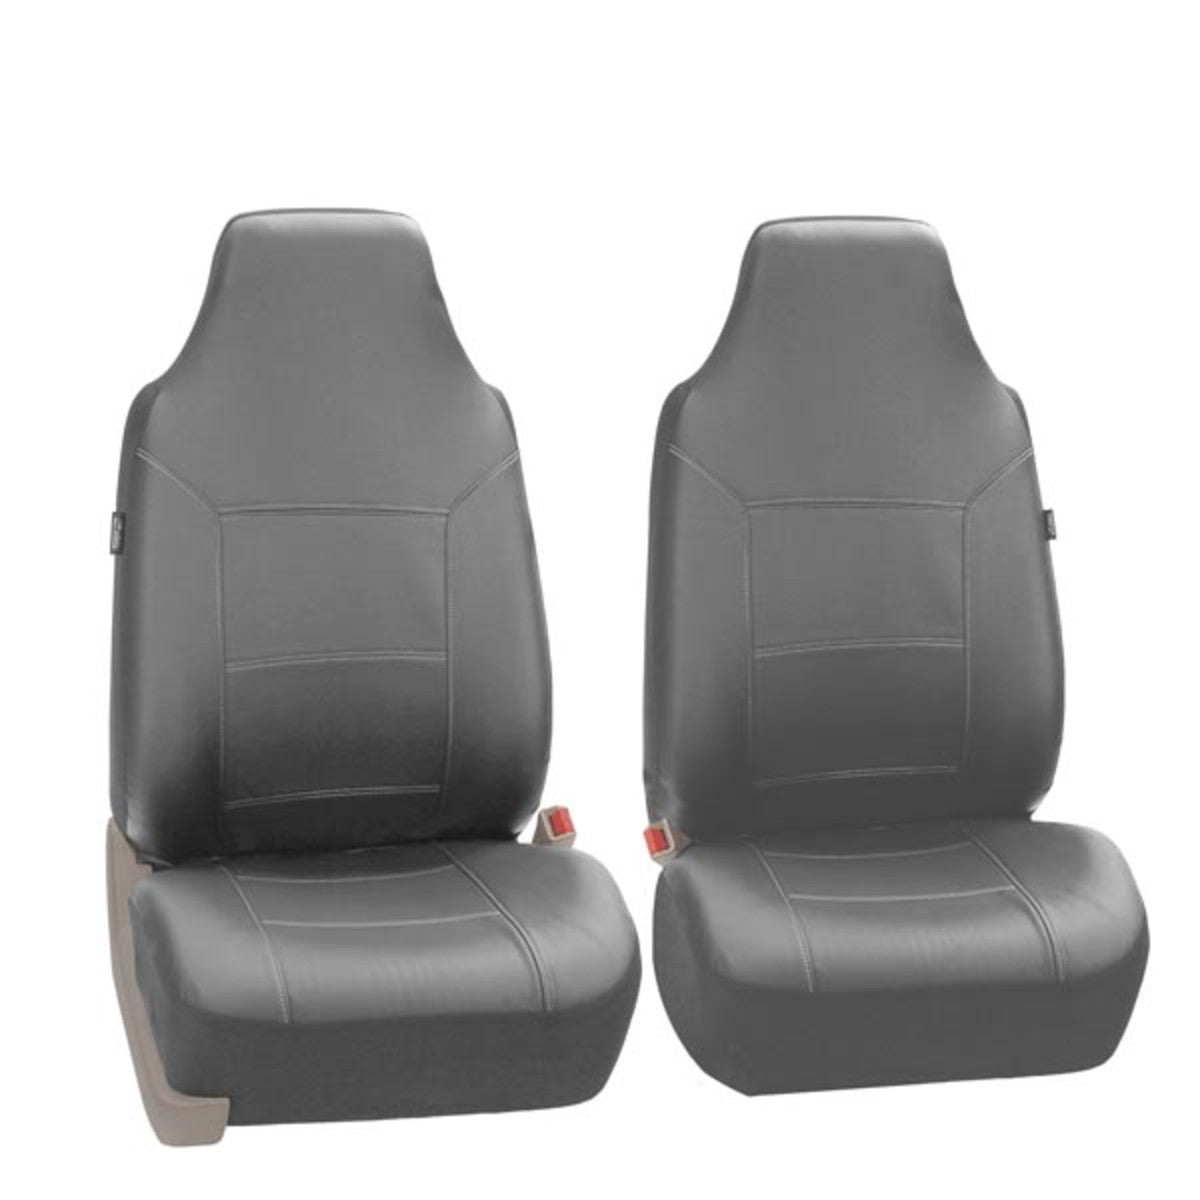 FH Group Ultra Comfort Leatherette Rear Set Seat Cushions with Bonus Air Freshener, Gray